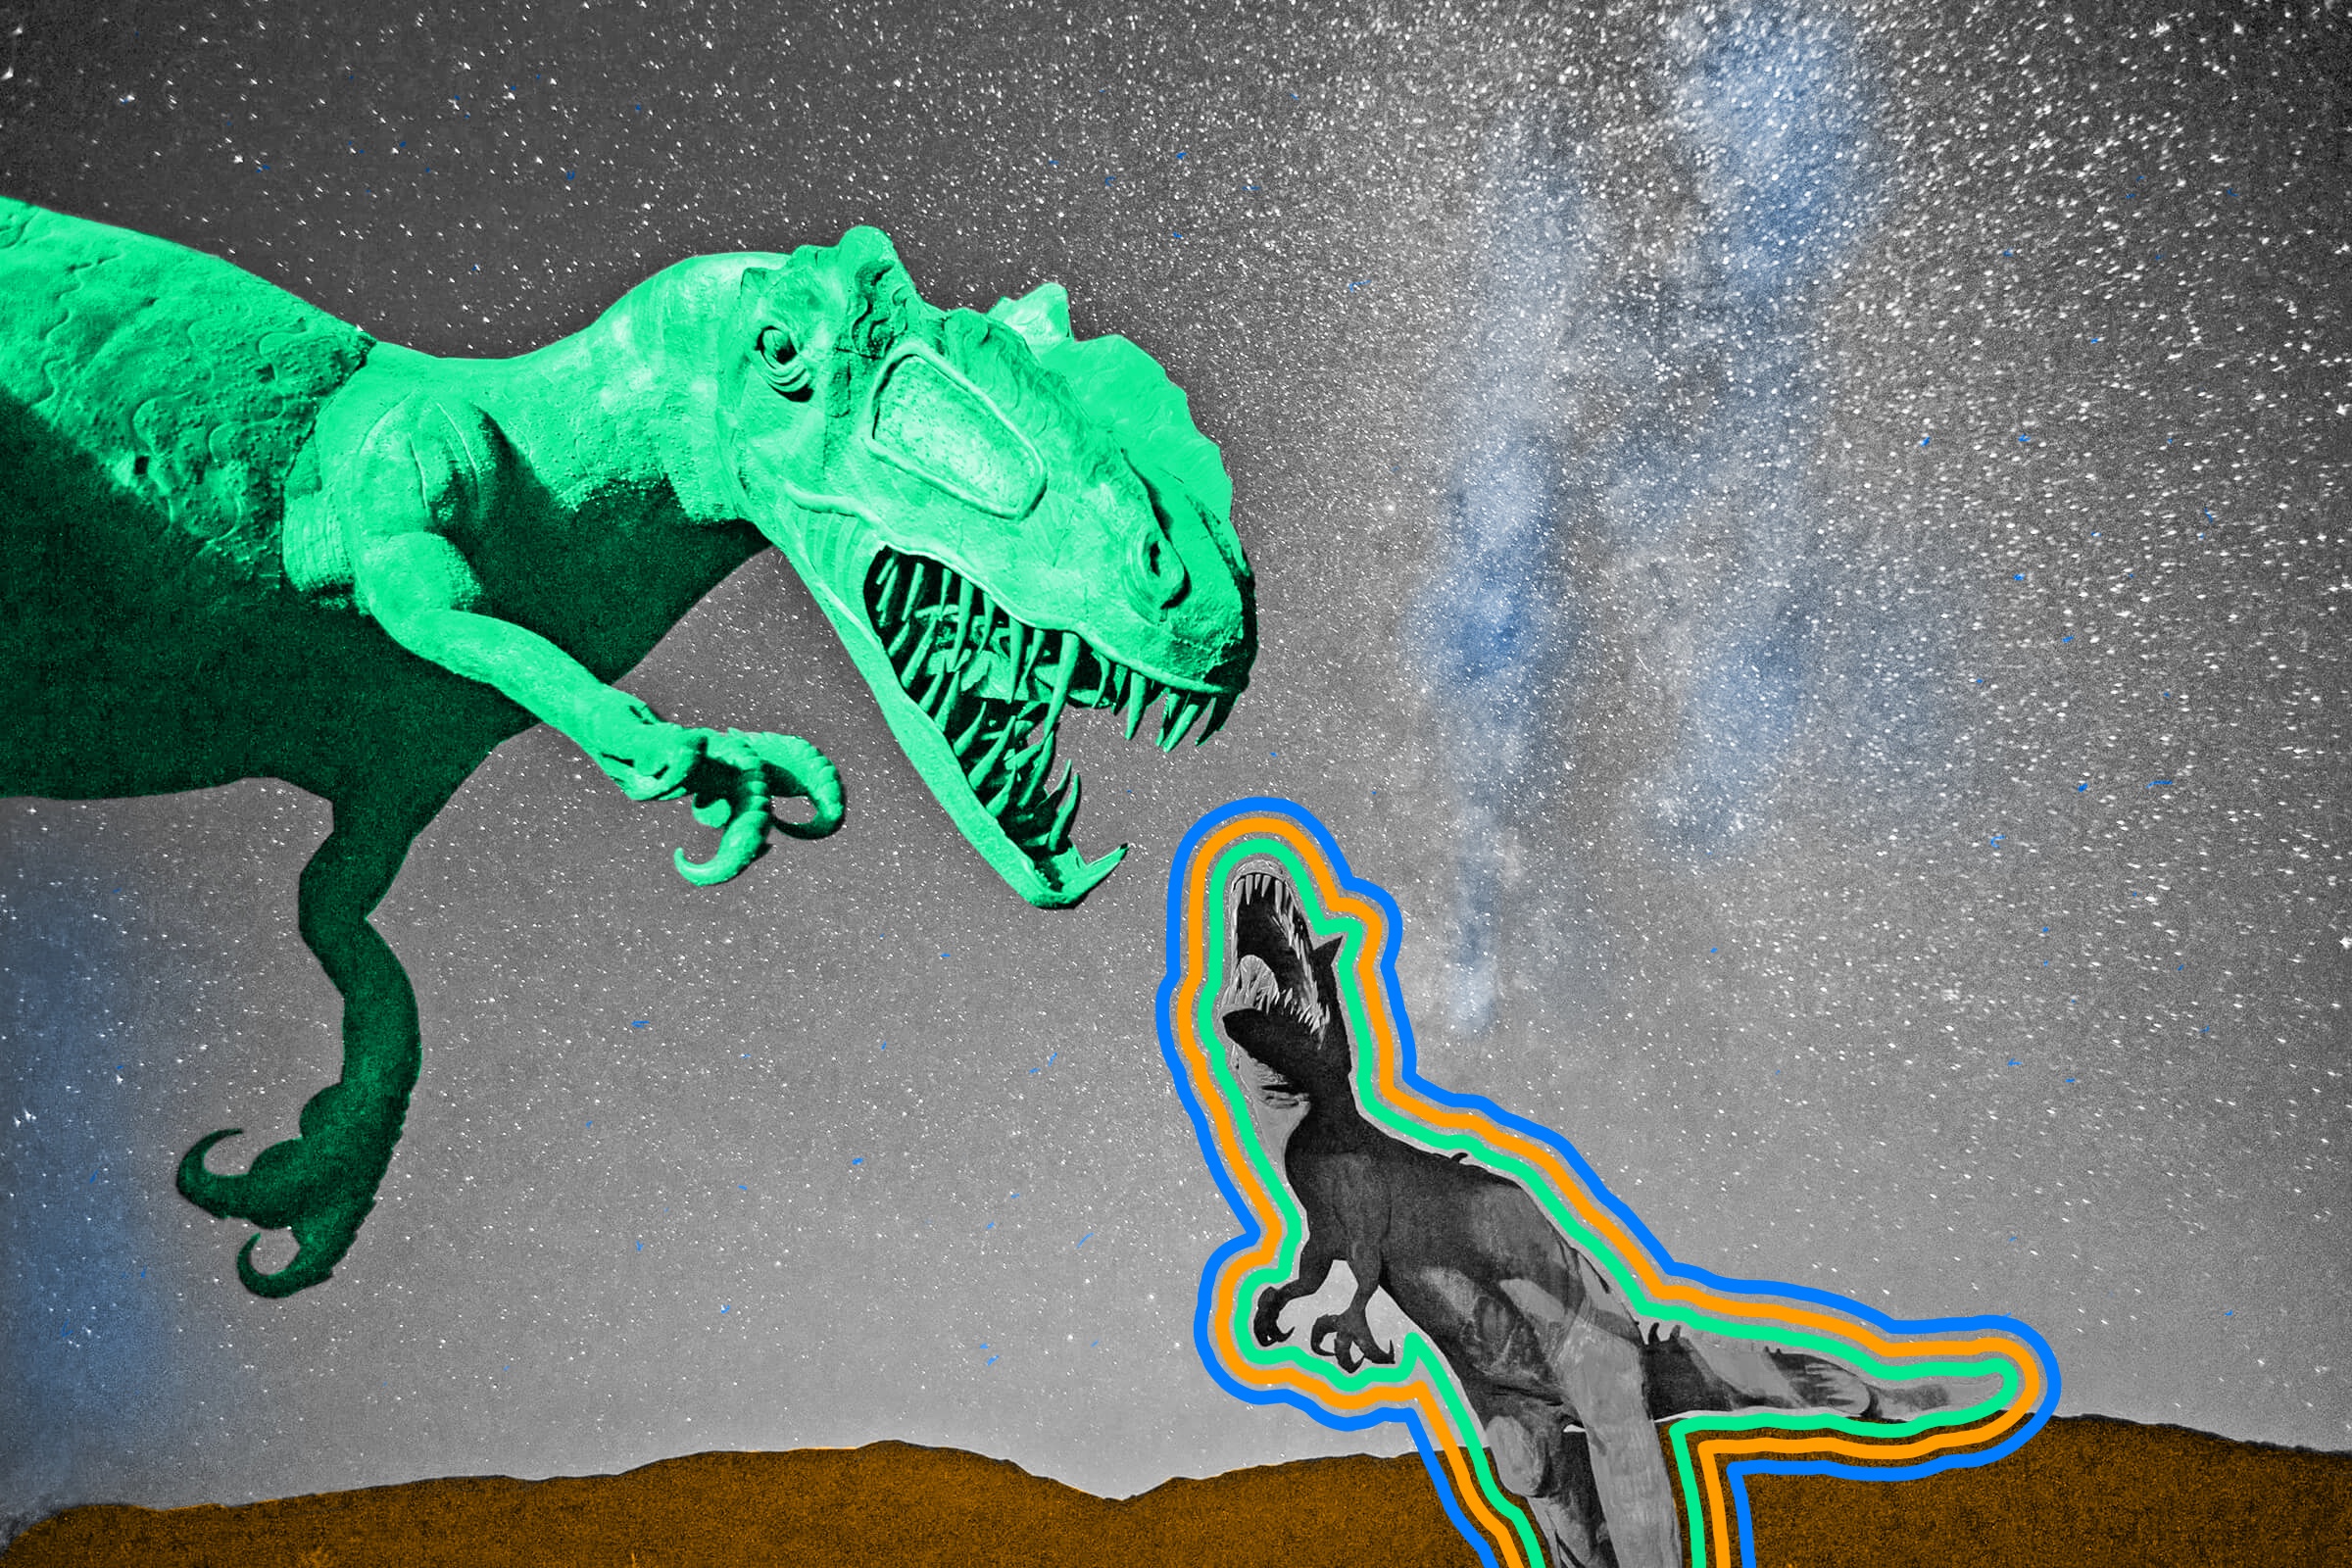 Earth was on the other side of the galaxy when the dinosaurs were alive.